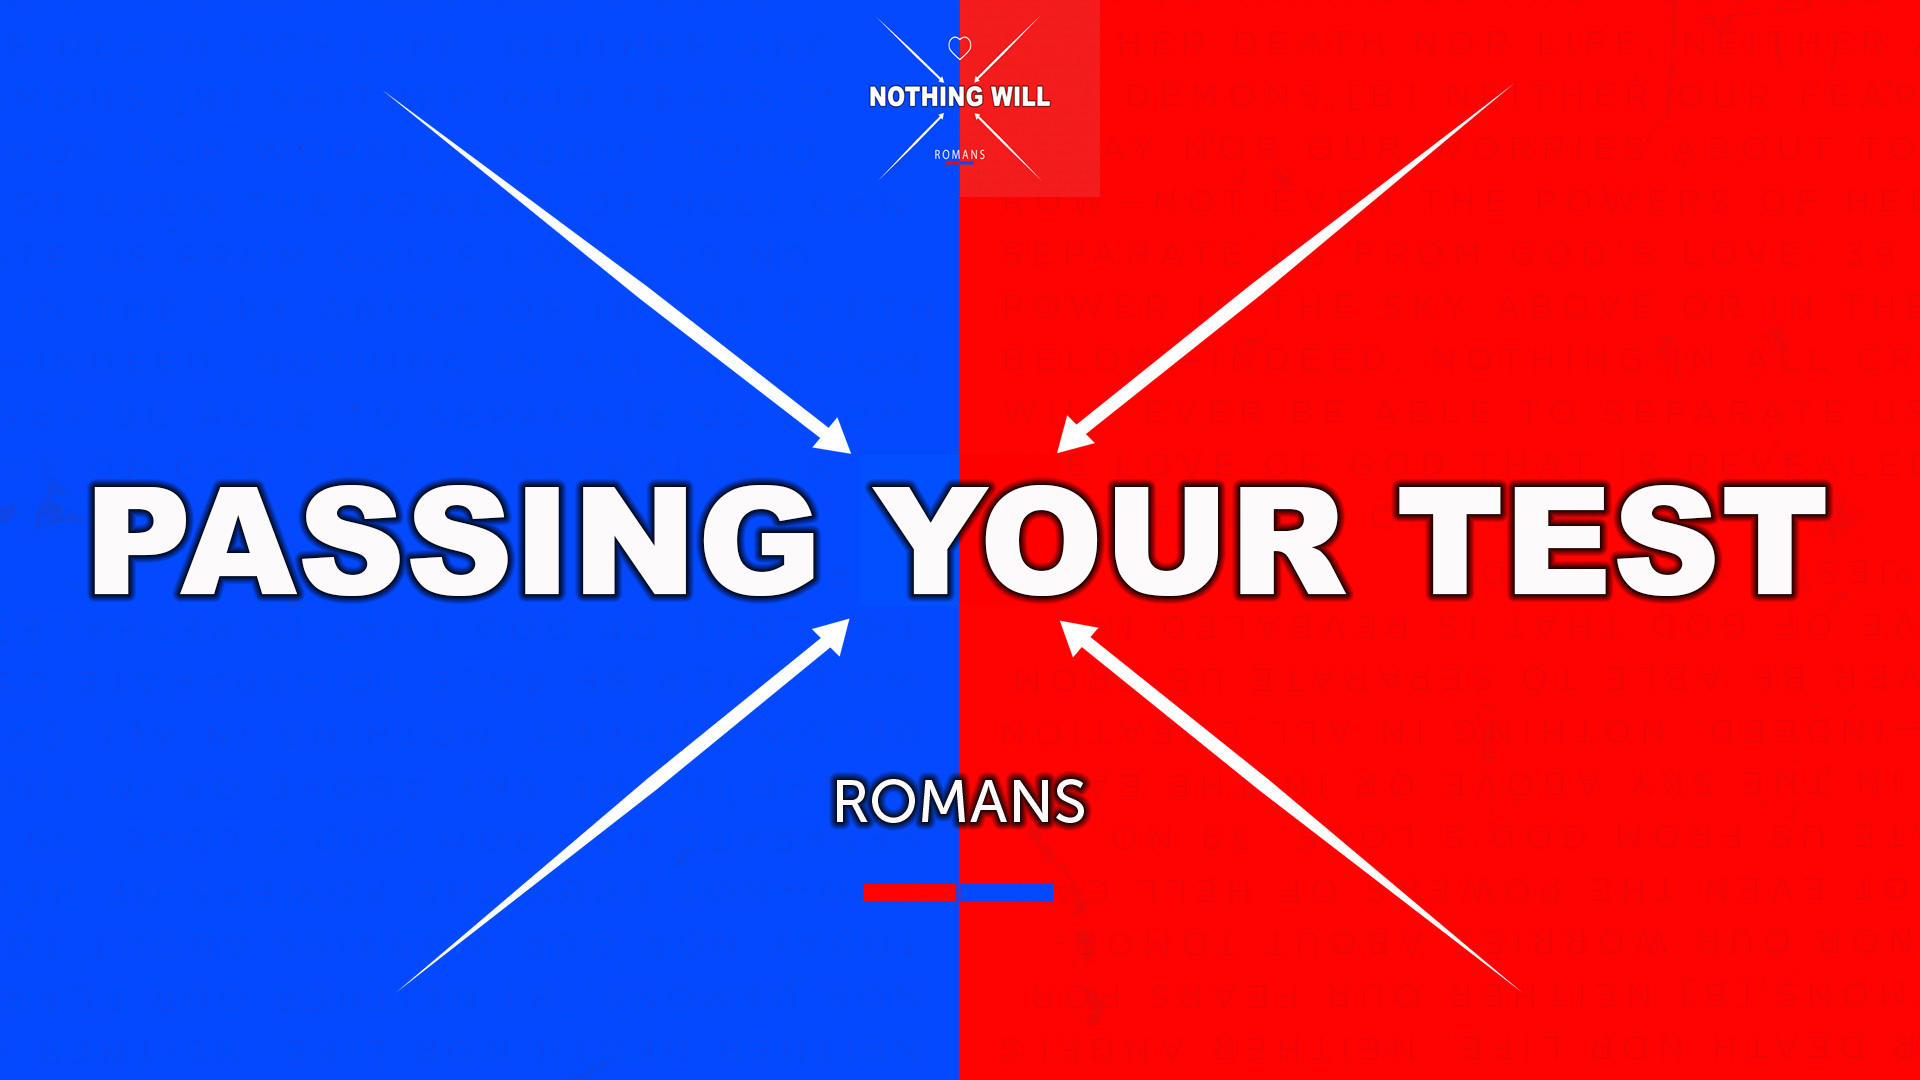 Pastor Josh: Romans | Nothing Will | Passing Your Test (04/03/16)